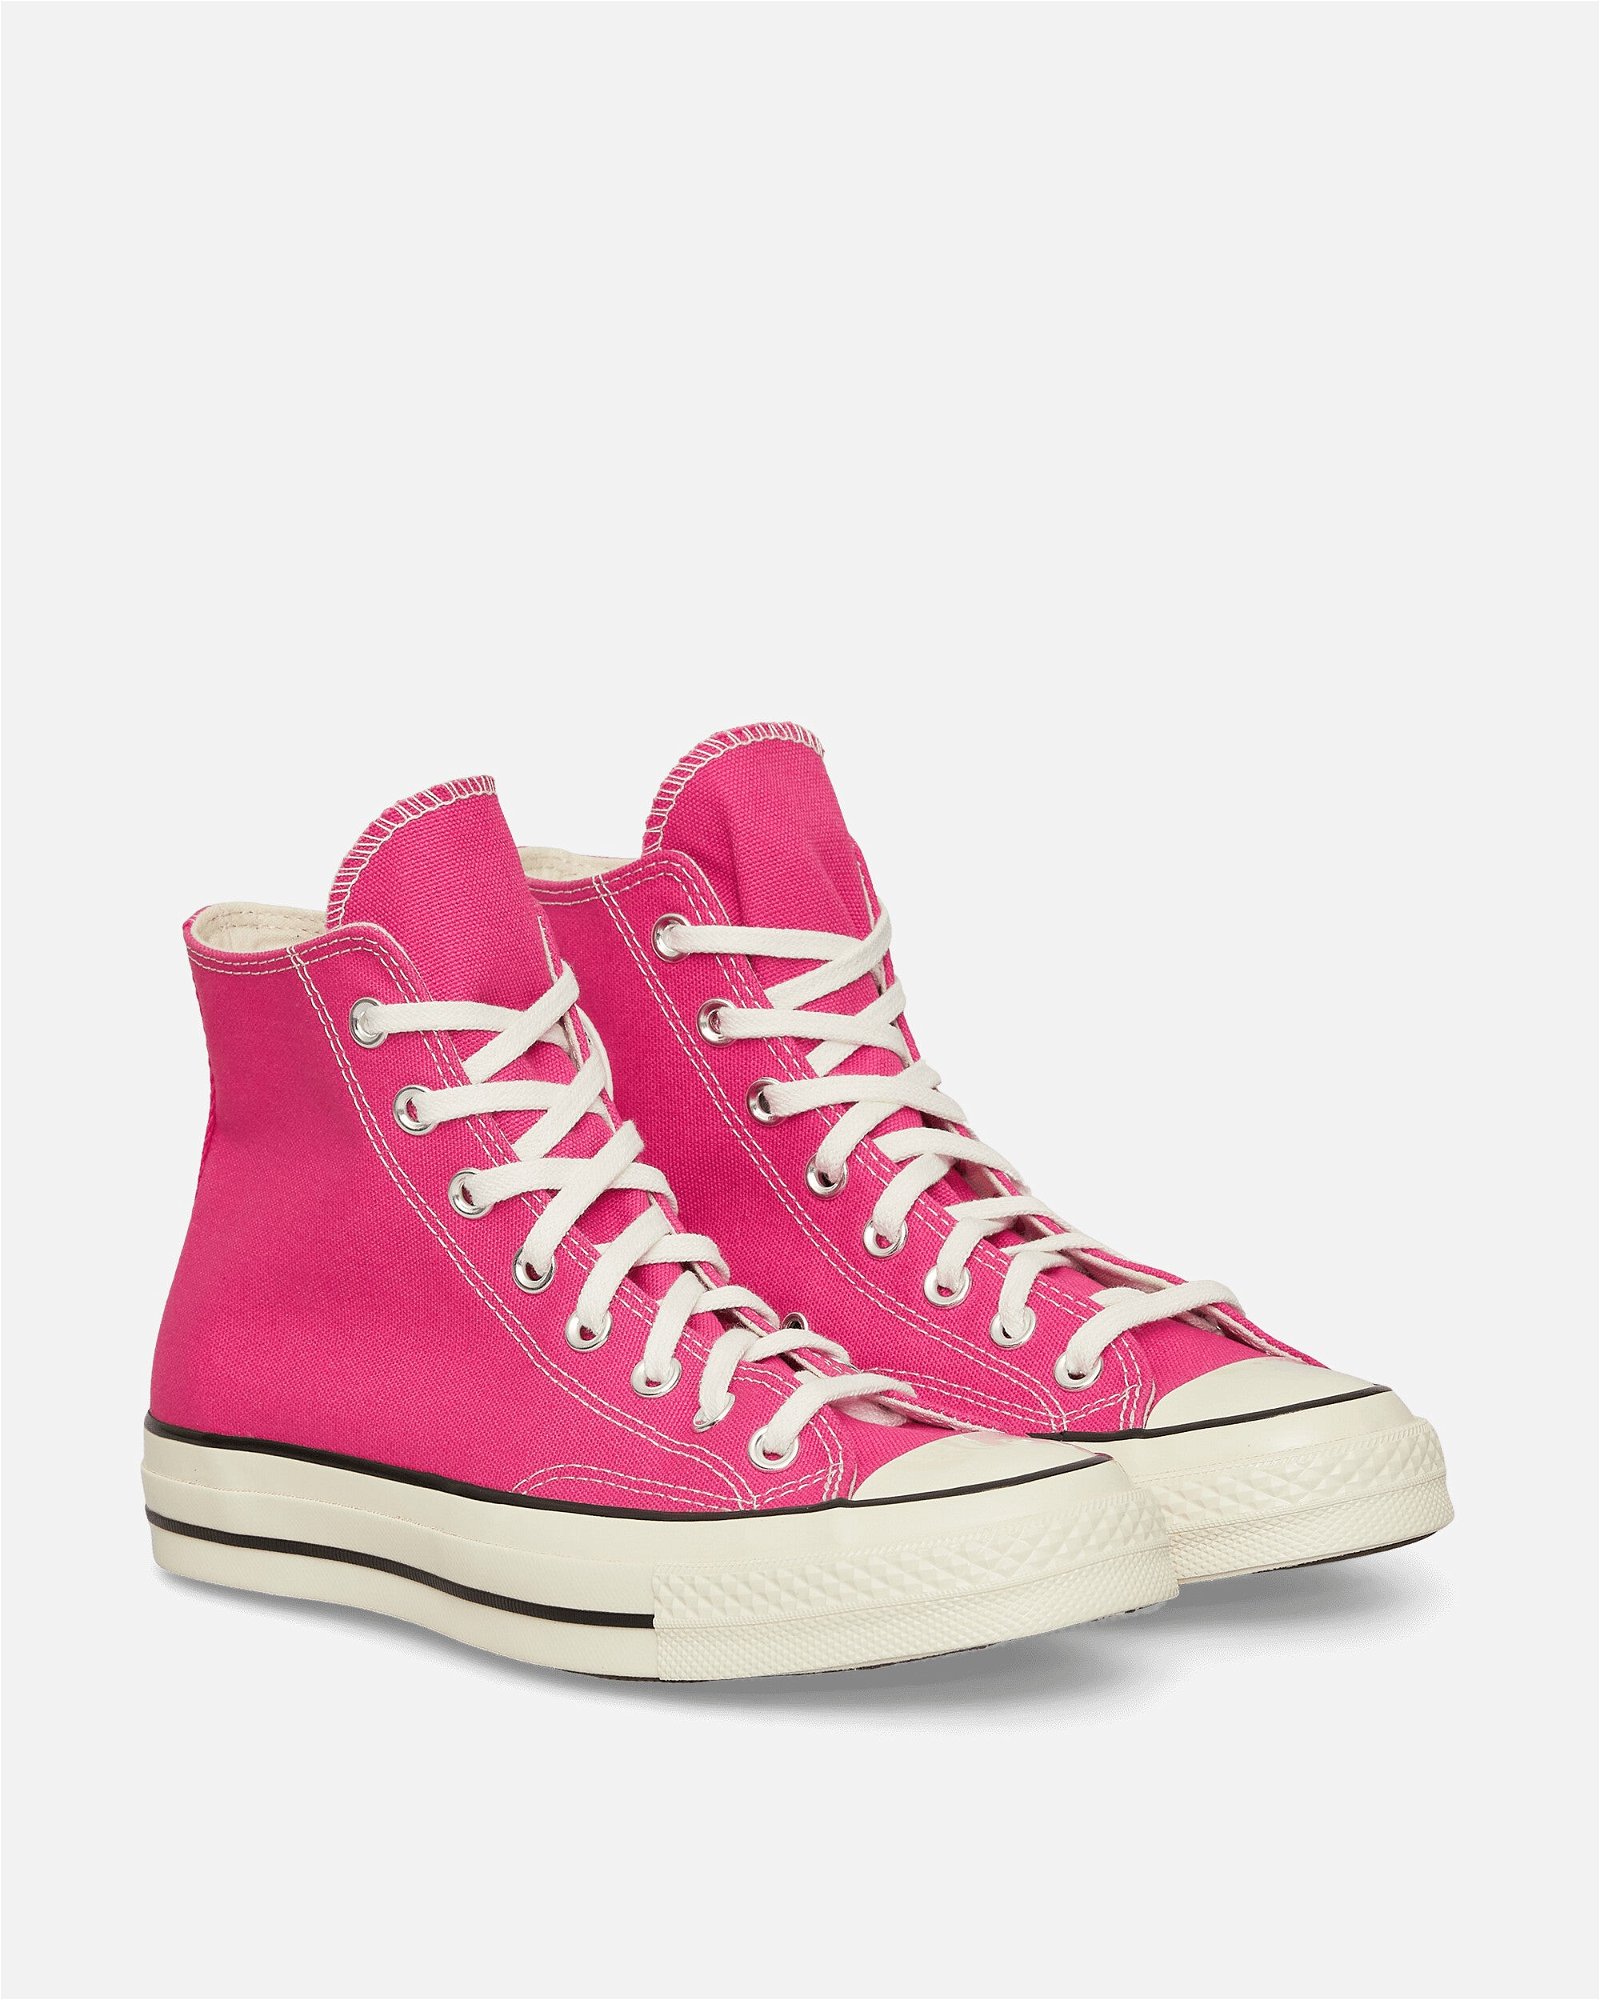 Chuck 70 Hi Sneakers "Lucky Pink"